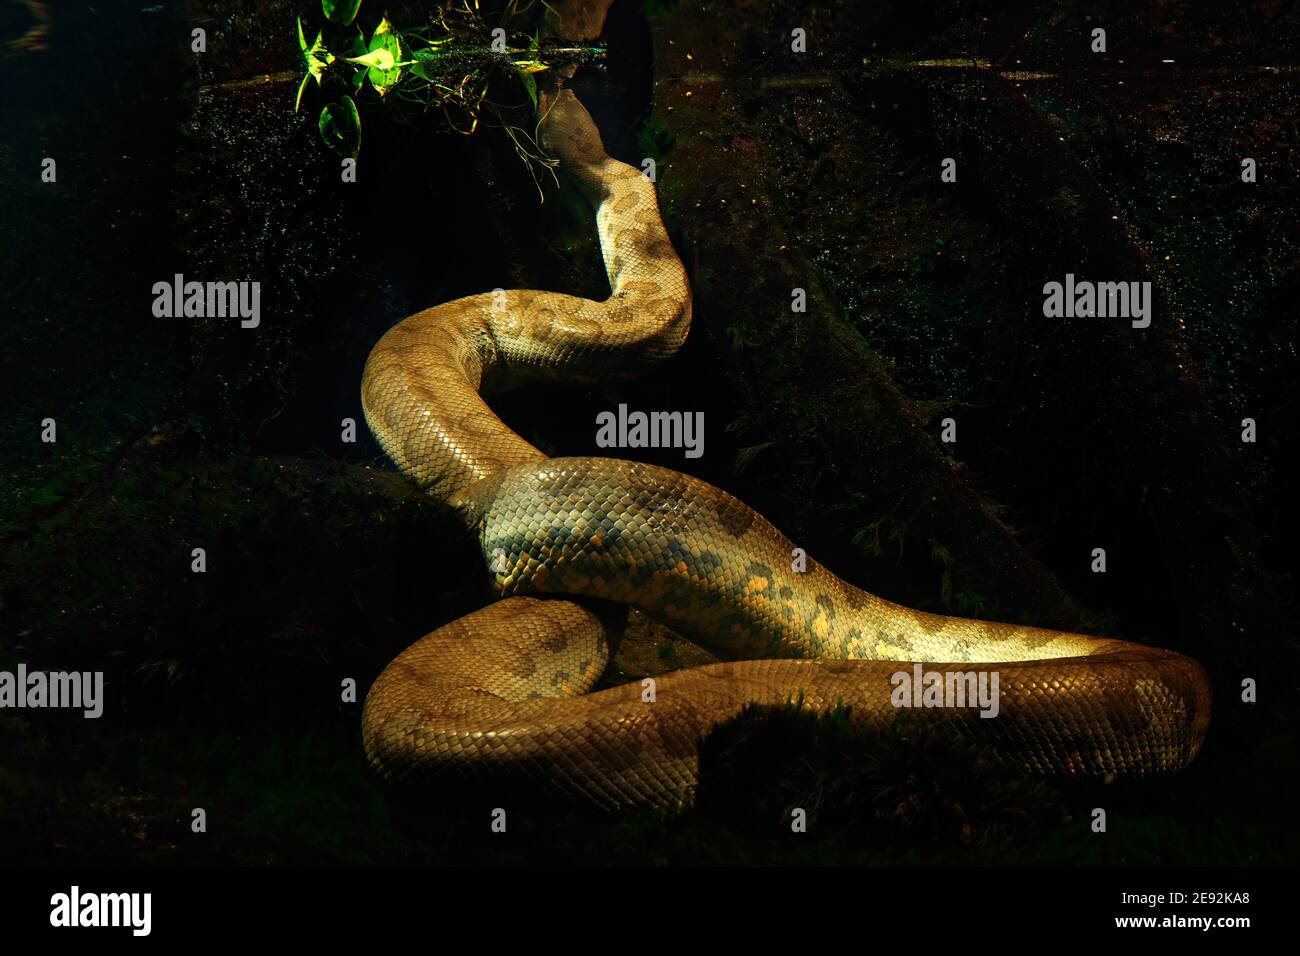 Green anaconda in the dark water, underwater photography with big snake in the nature river habitat, Pantanal, Brazil. Stock Photo